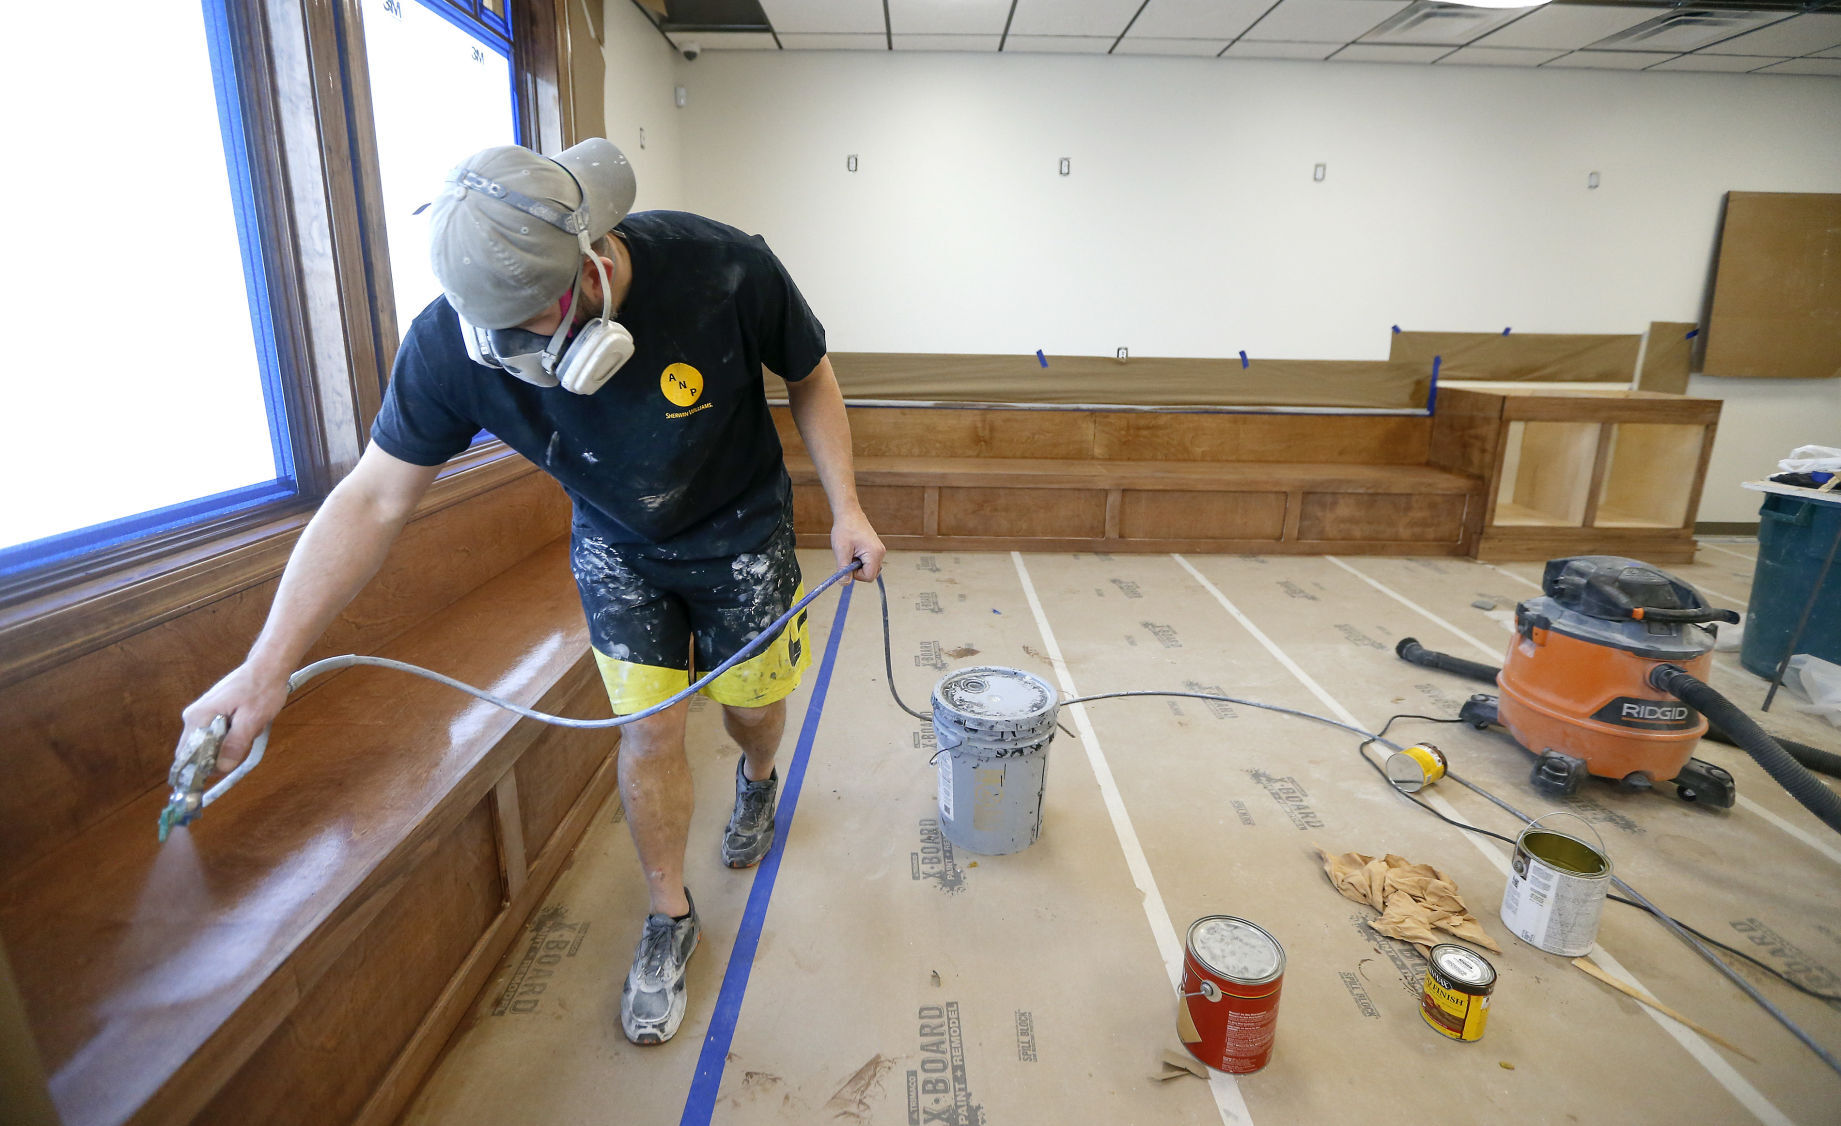 Greg Lehman, of Lehman Painting, sprays lacquer onto wooden seating in the lobby of the future home of an adult-use cannabis dispensary on Illinois 35 in East Dubuque, Ill. PHOTO CREDIT: Dave Kettering